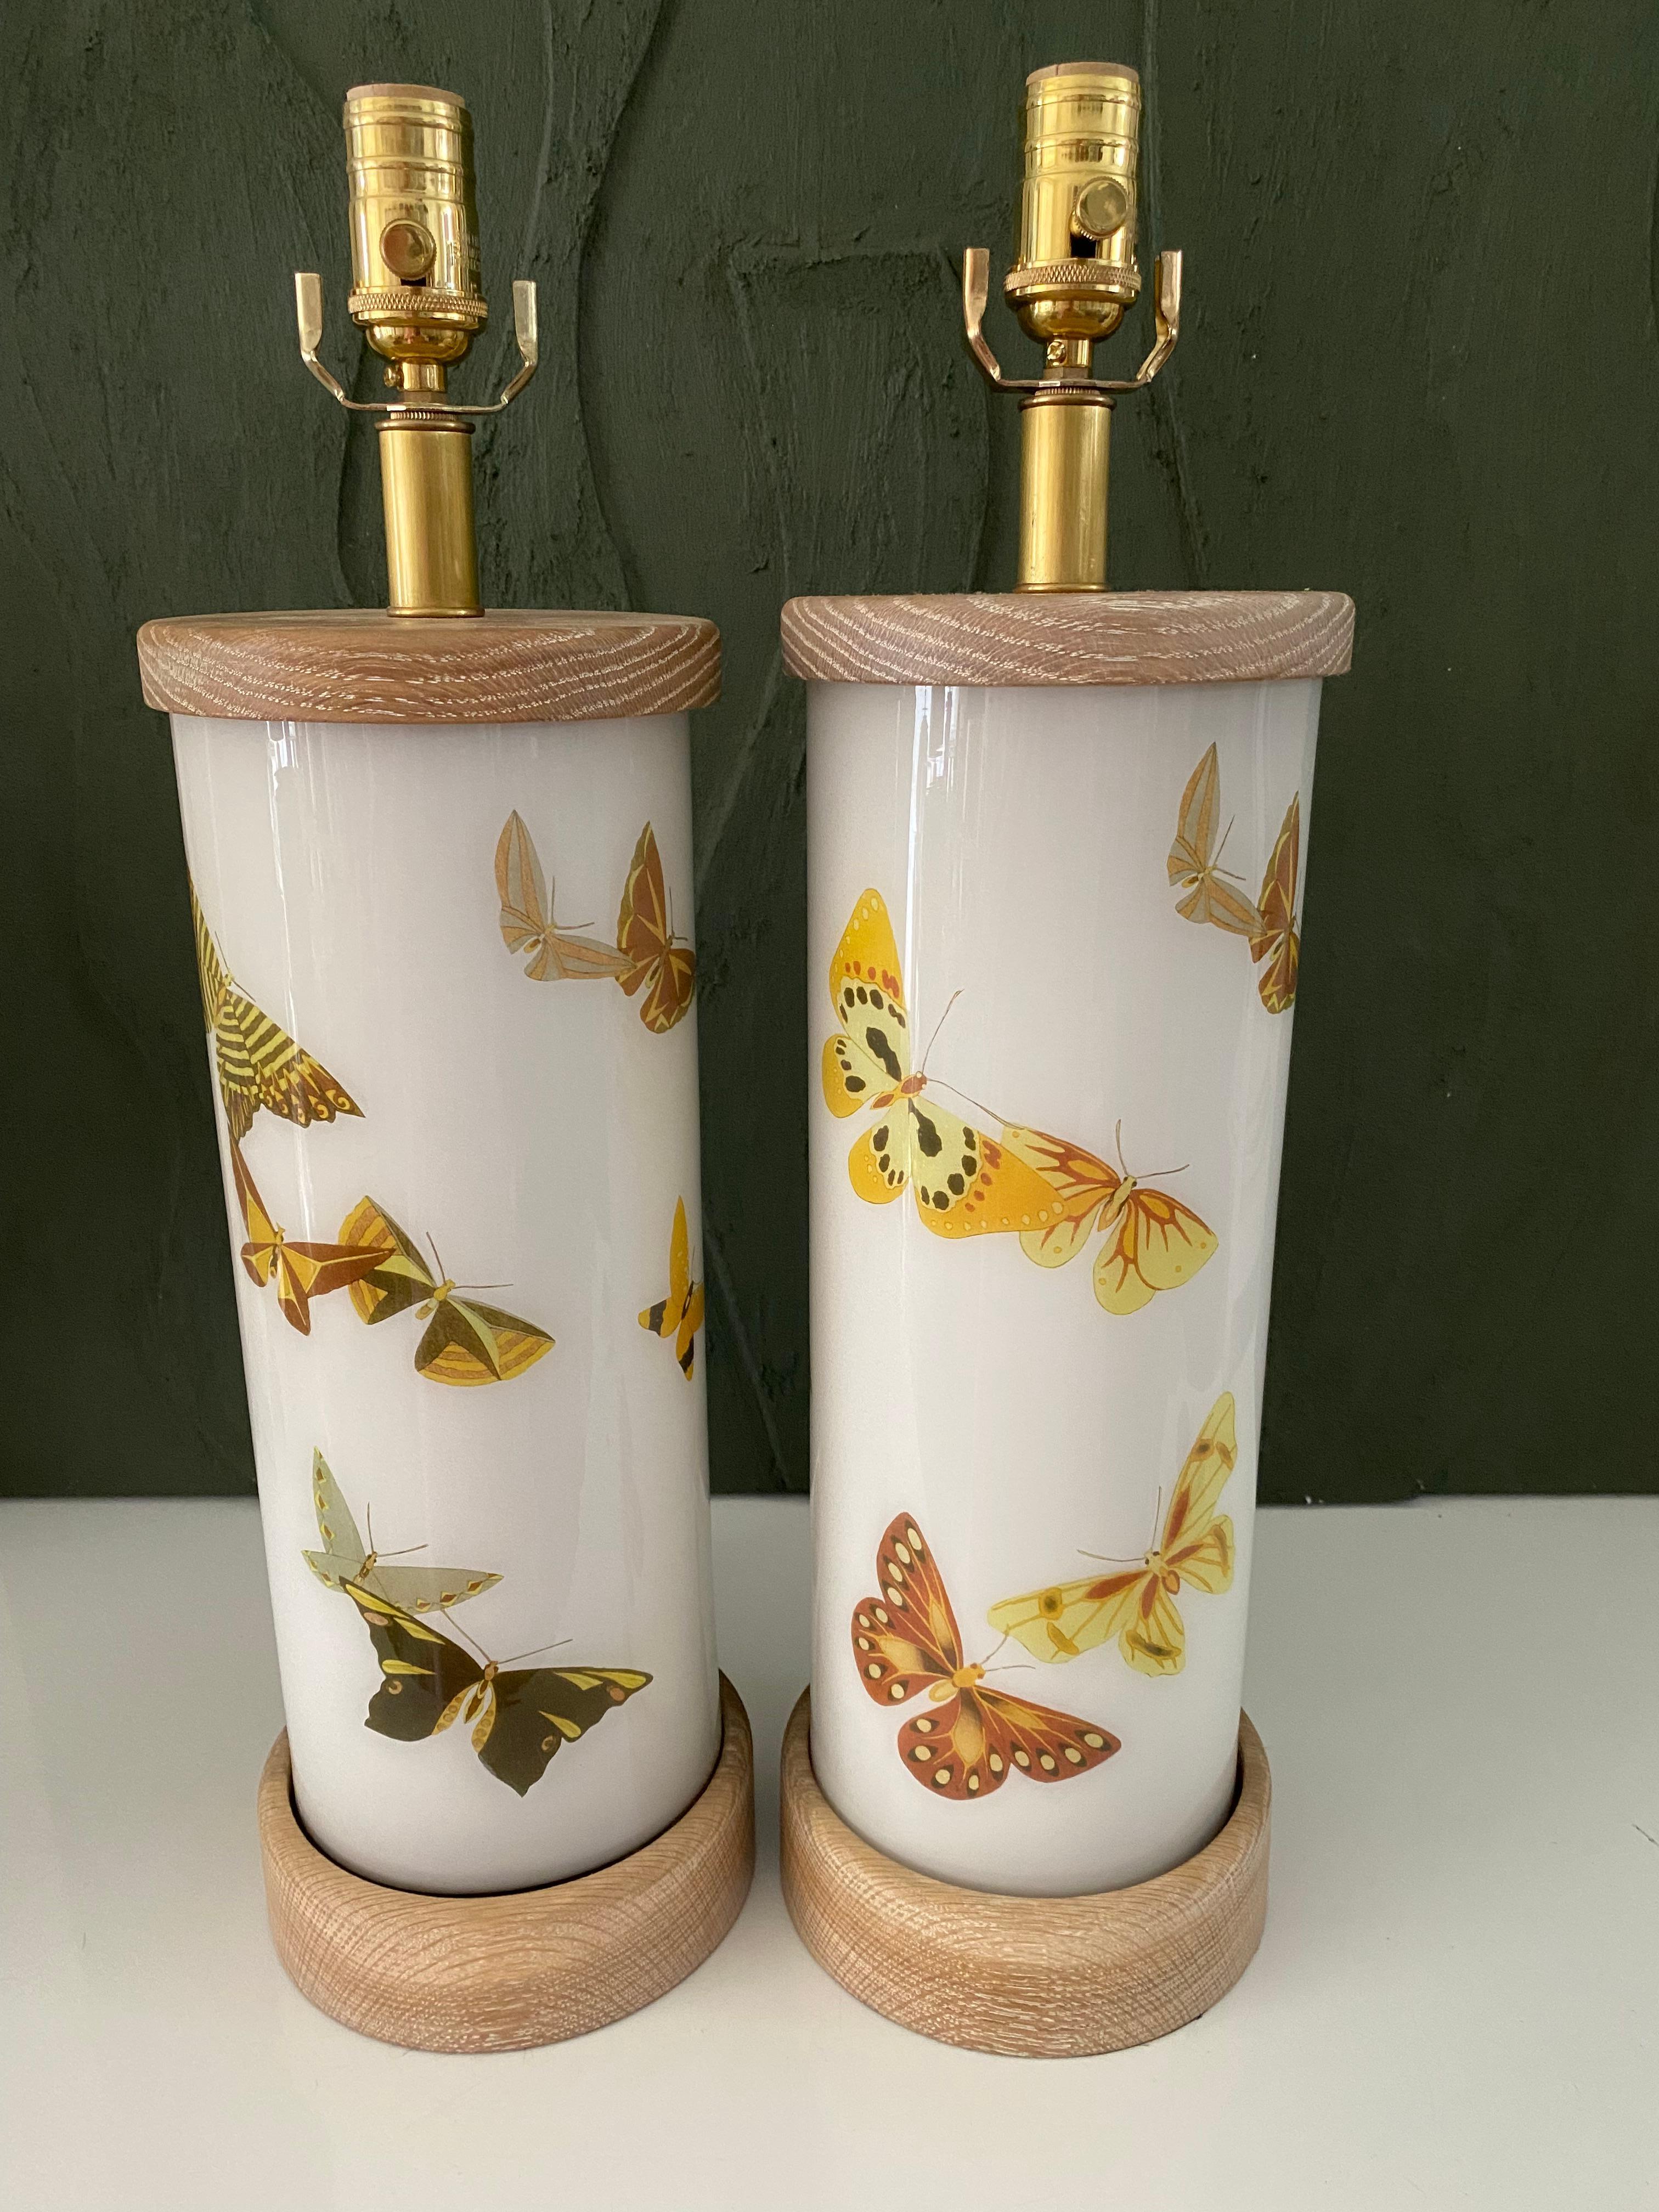 Hand made with care in Houston, Texas. This glass lamp features a selection of earth-tone beautiful butterflies against a soft white background, for a mid-century modern feel. They have hand-turned cerused oak bases and caps, polished brass dimmer